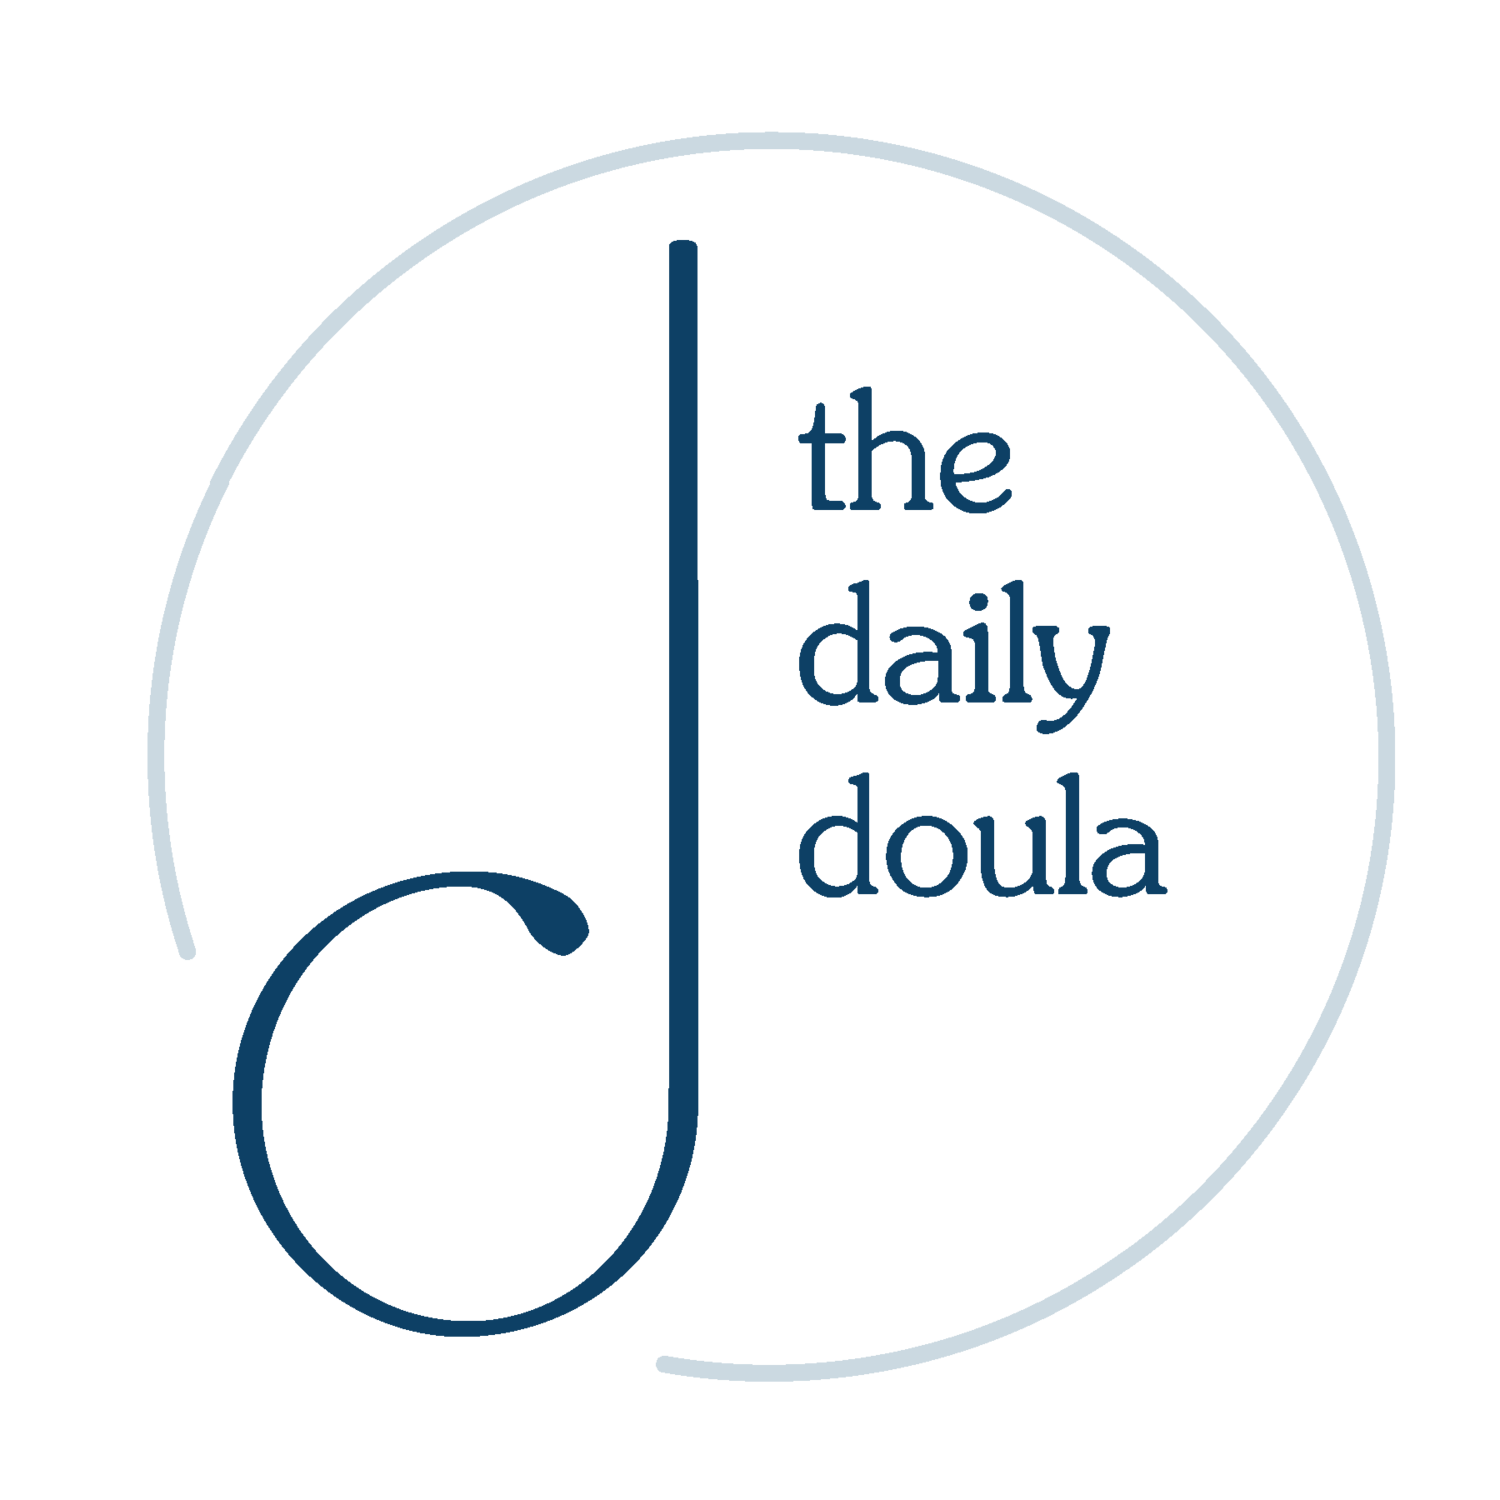 The Daily Doula